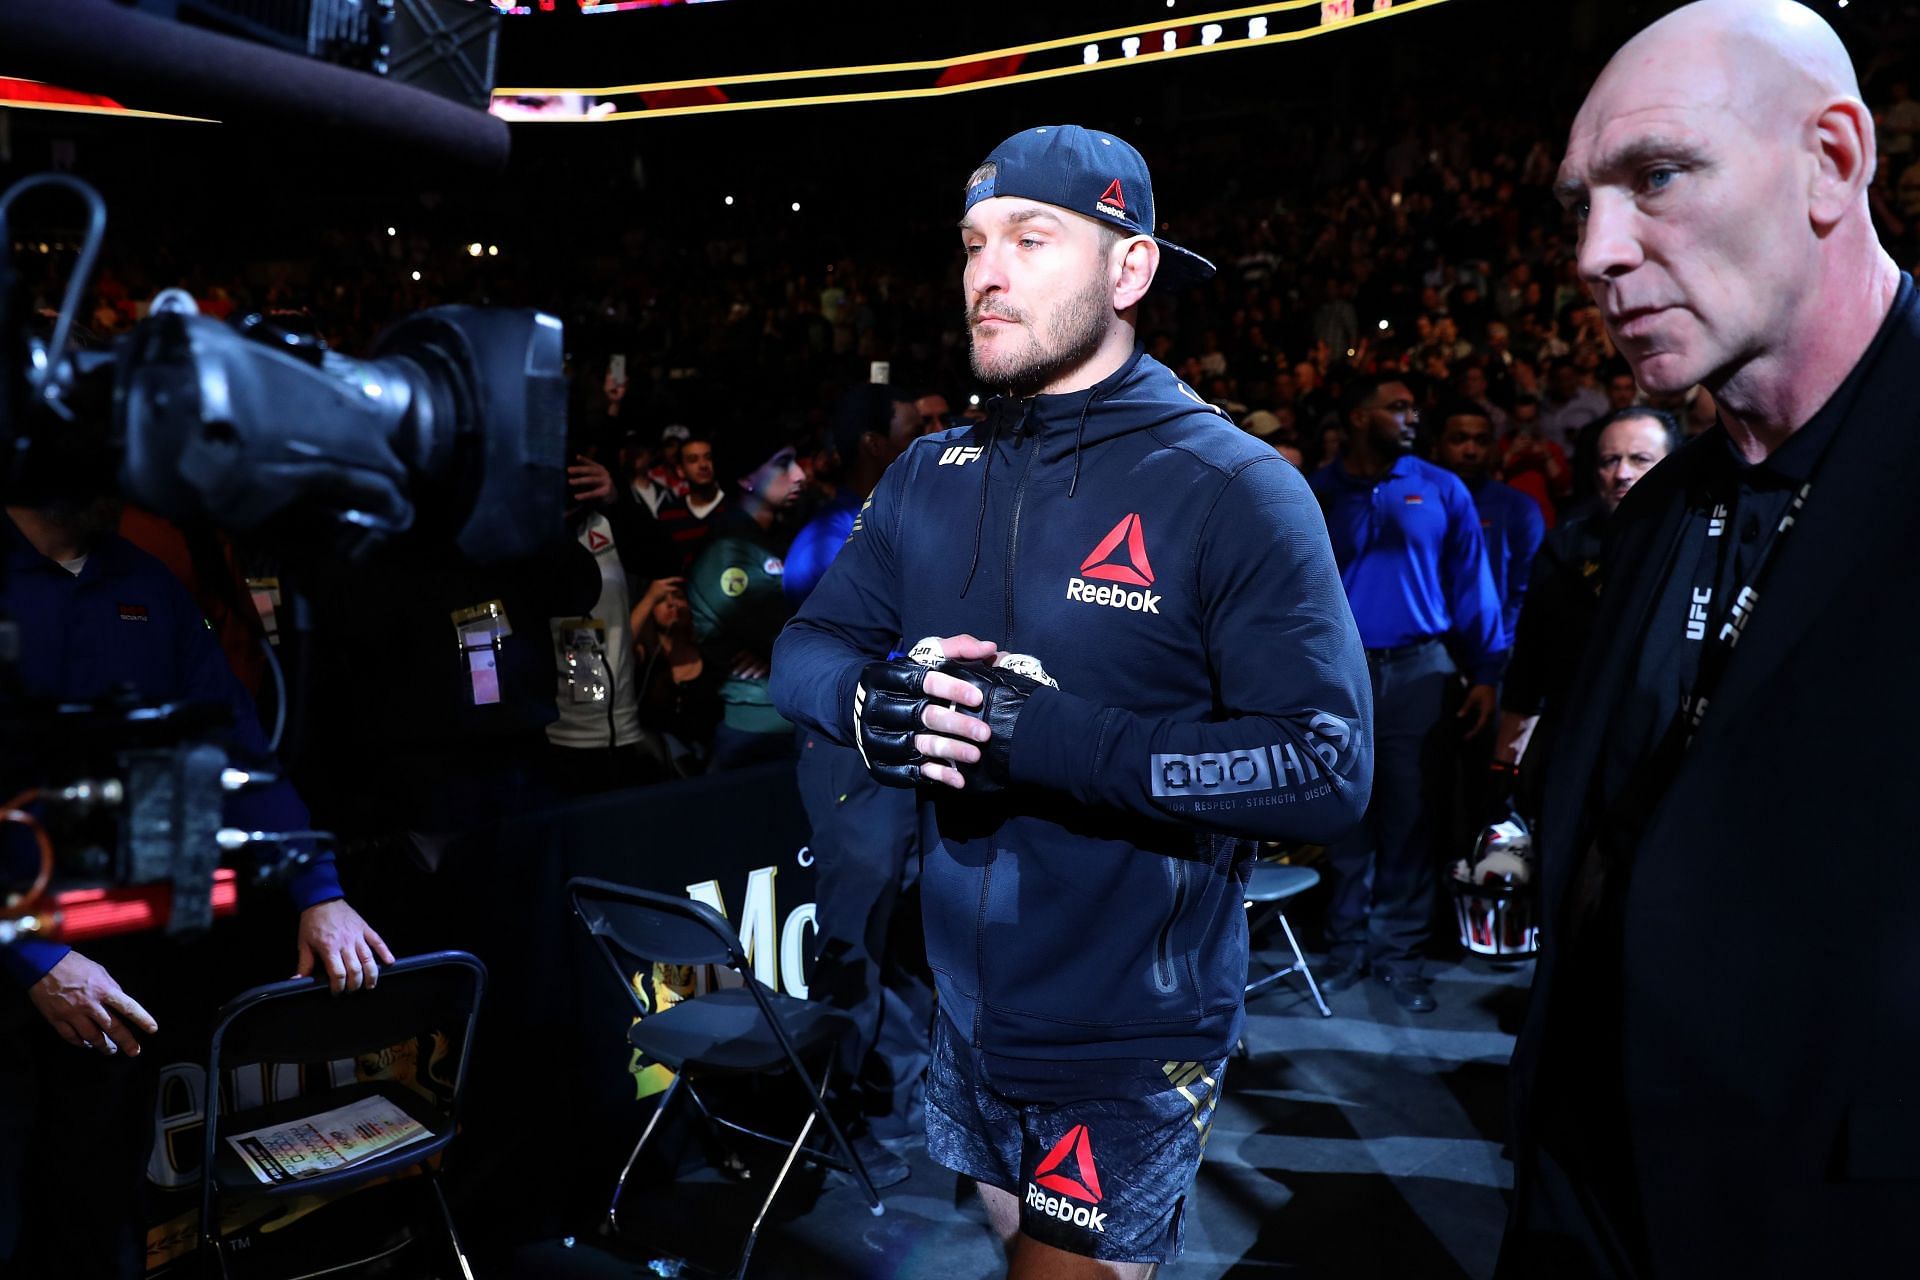 Miocic is ranked no. 2 with a record of 20-4